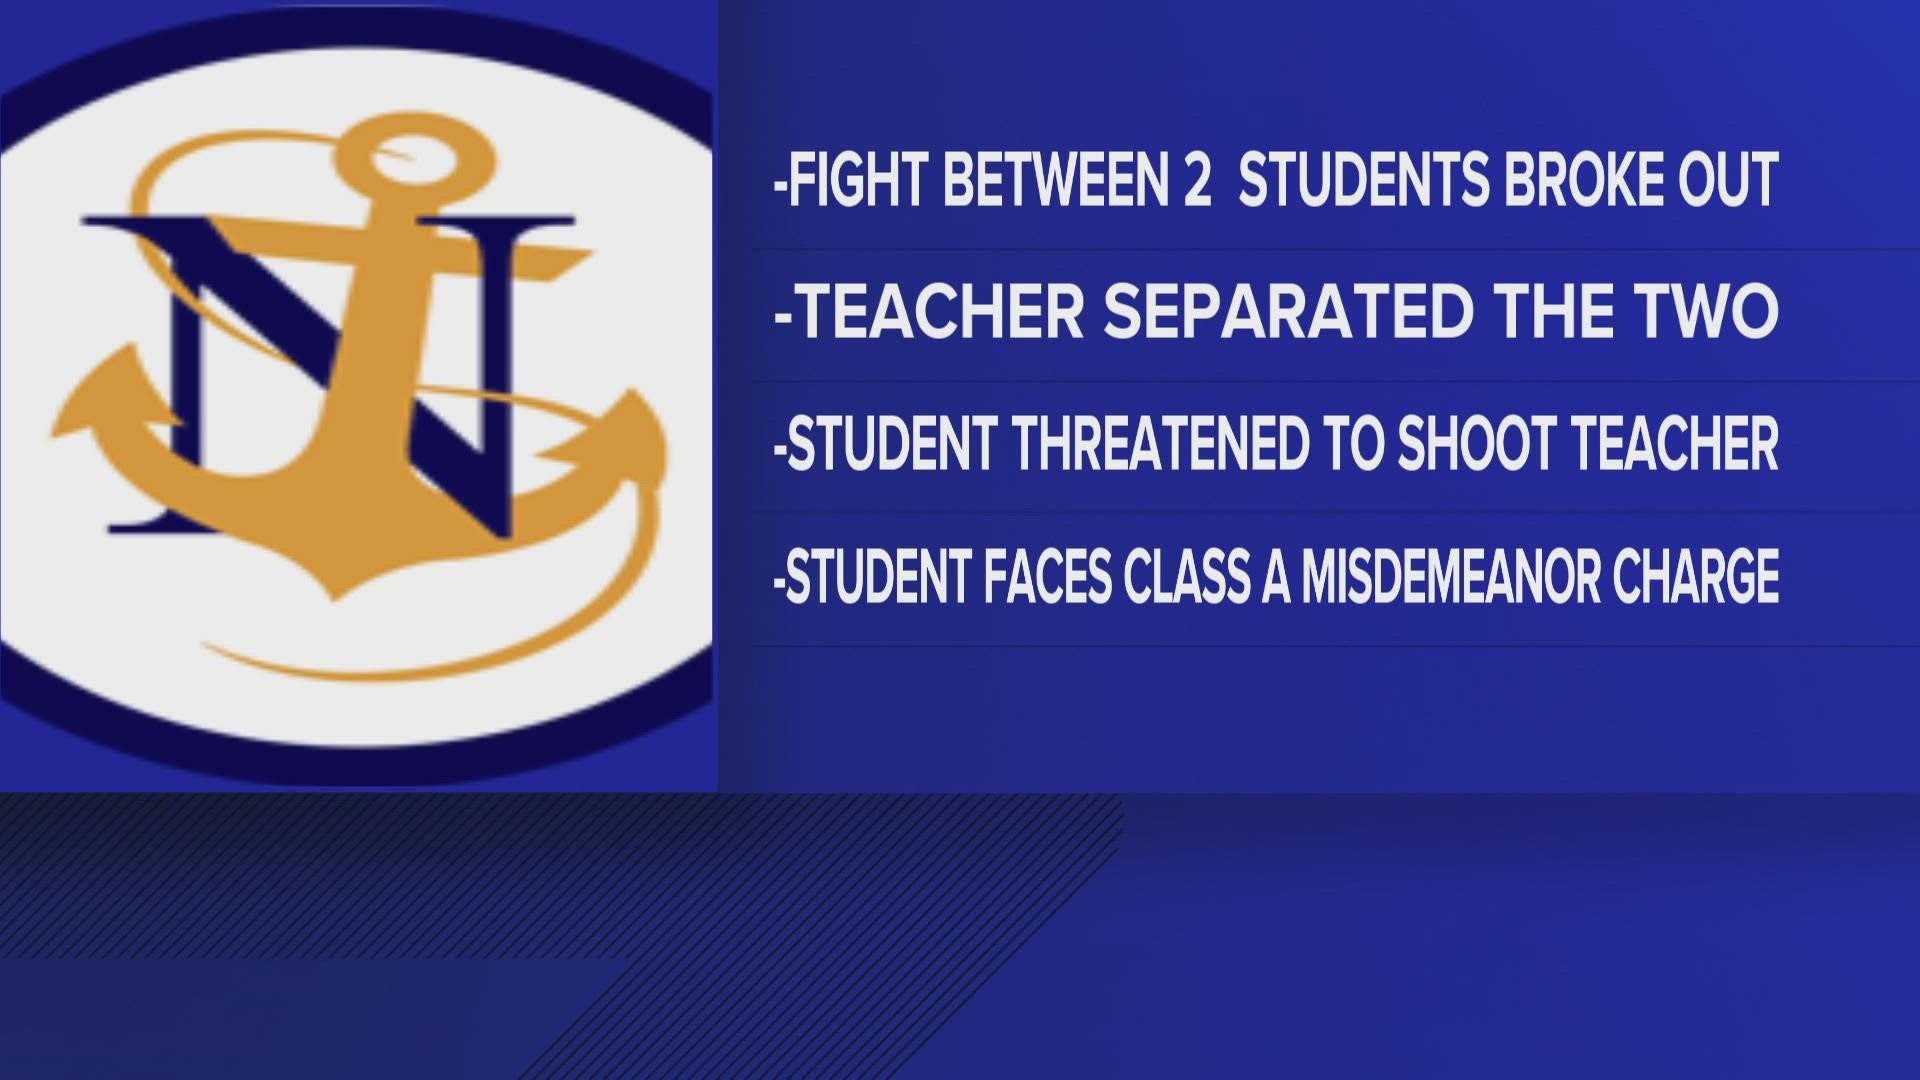 The eighth grade student did not have a gun at the time of the threat.